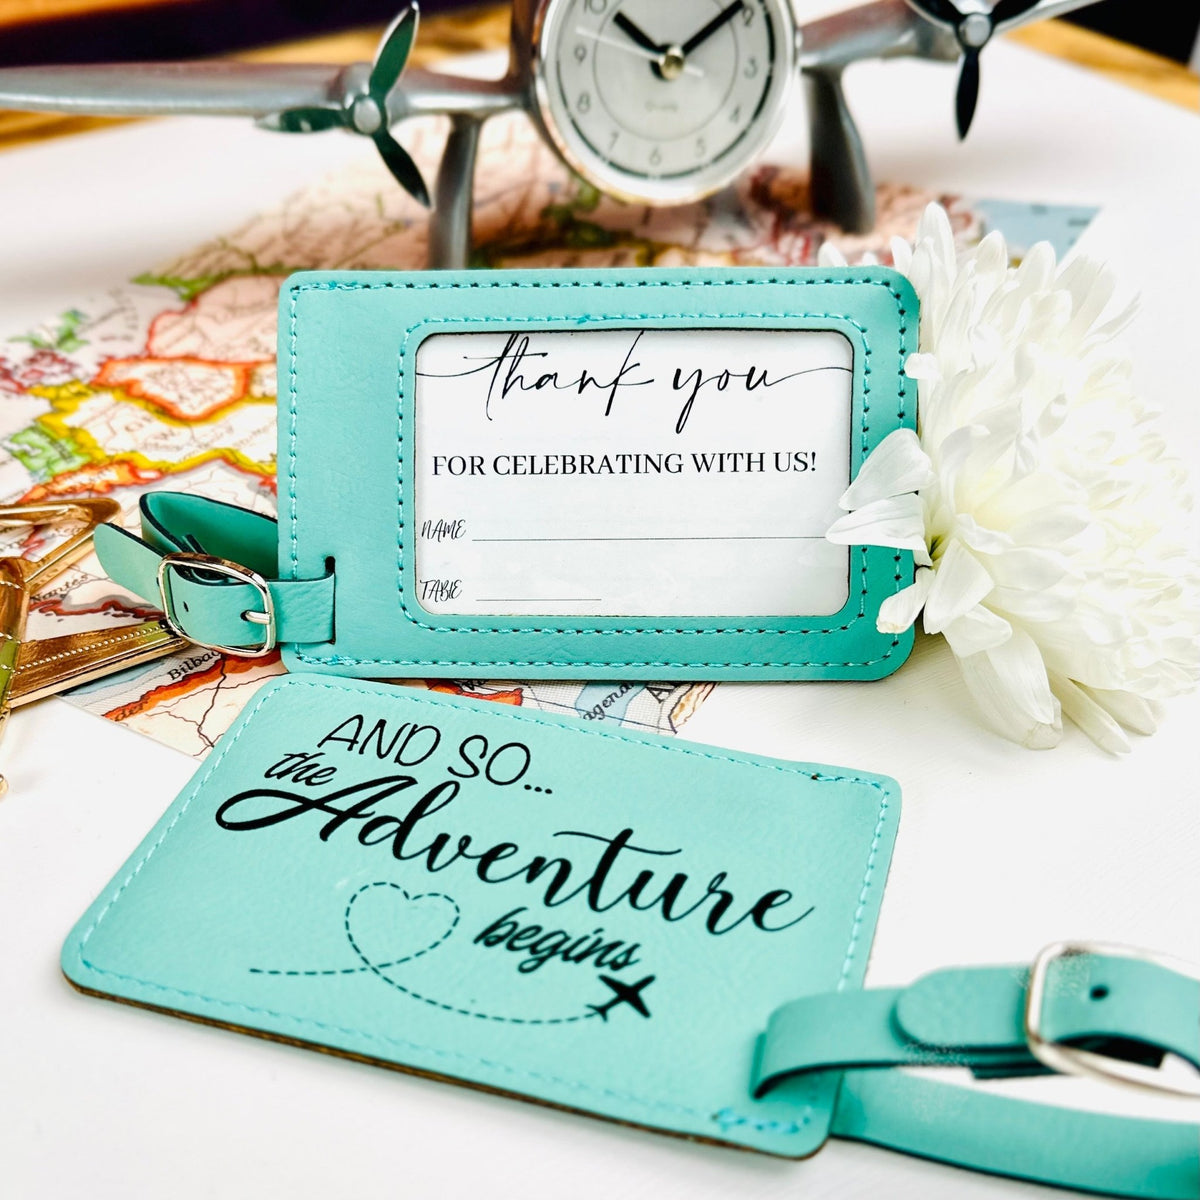 And So The Adventure Begins Luggage Tag - Forever Wedding Favors